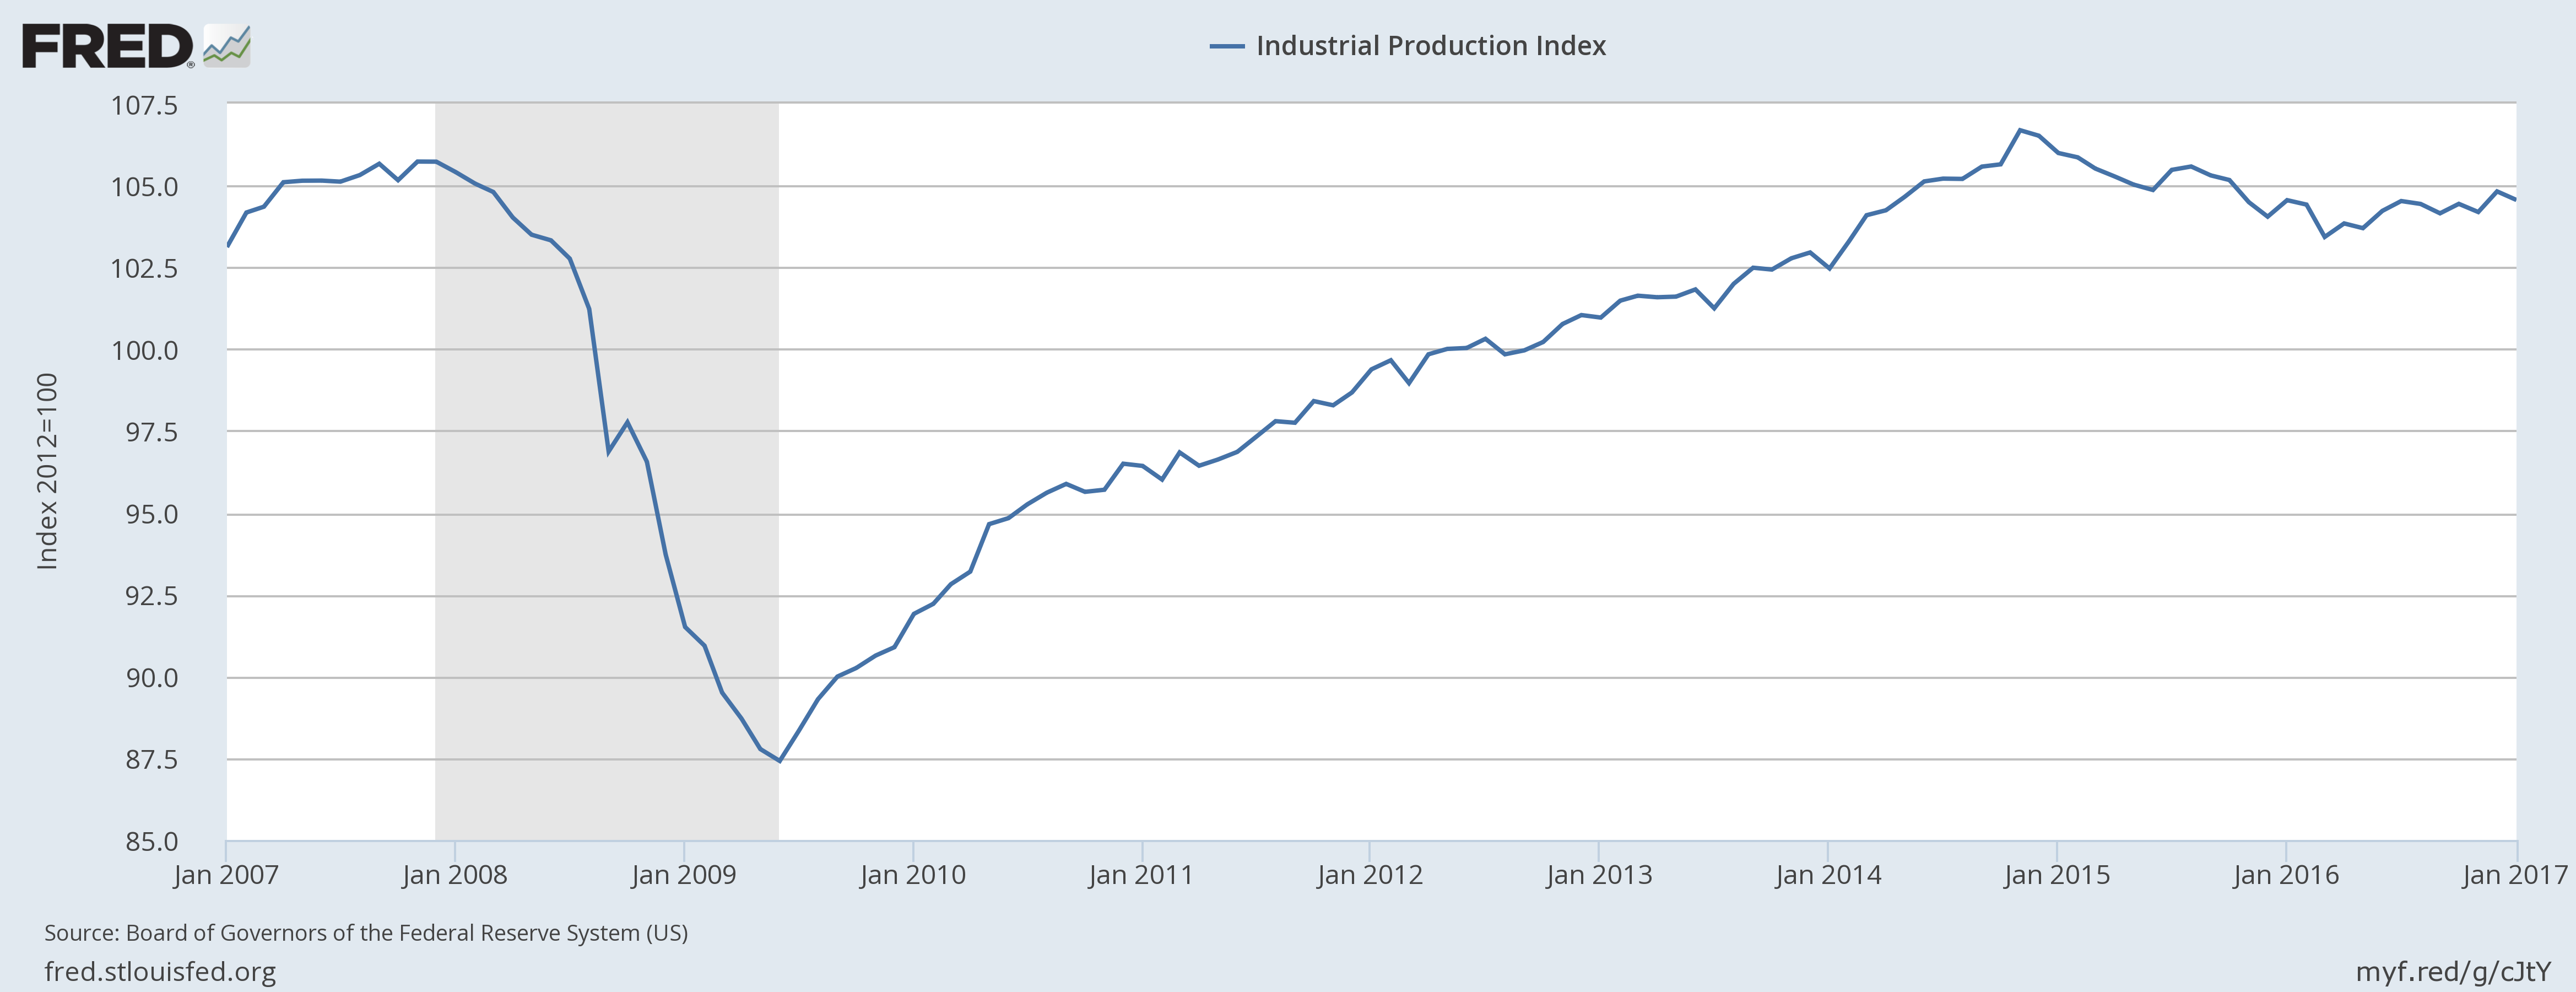 Industrial production was down slightly